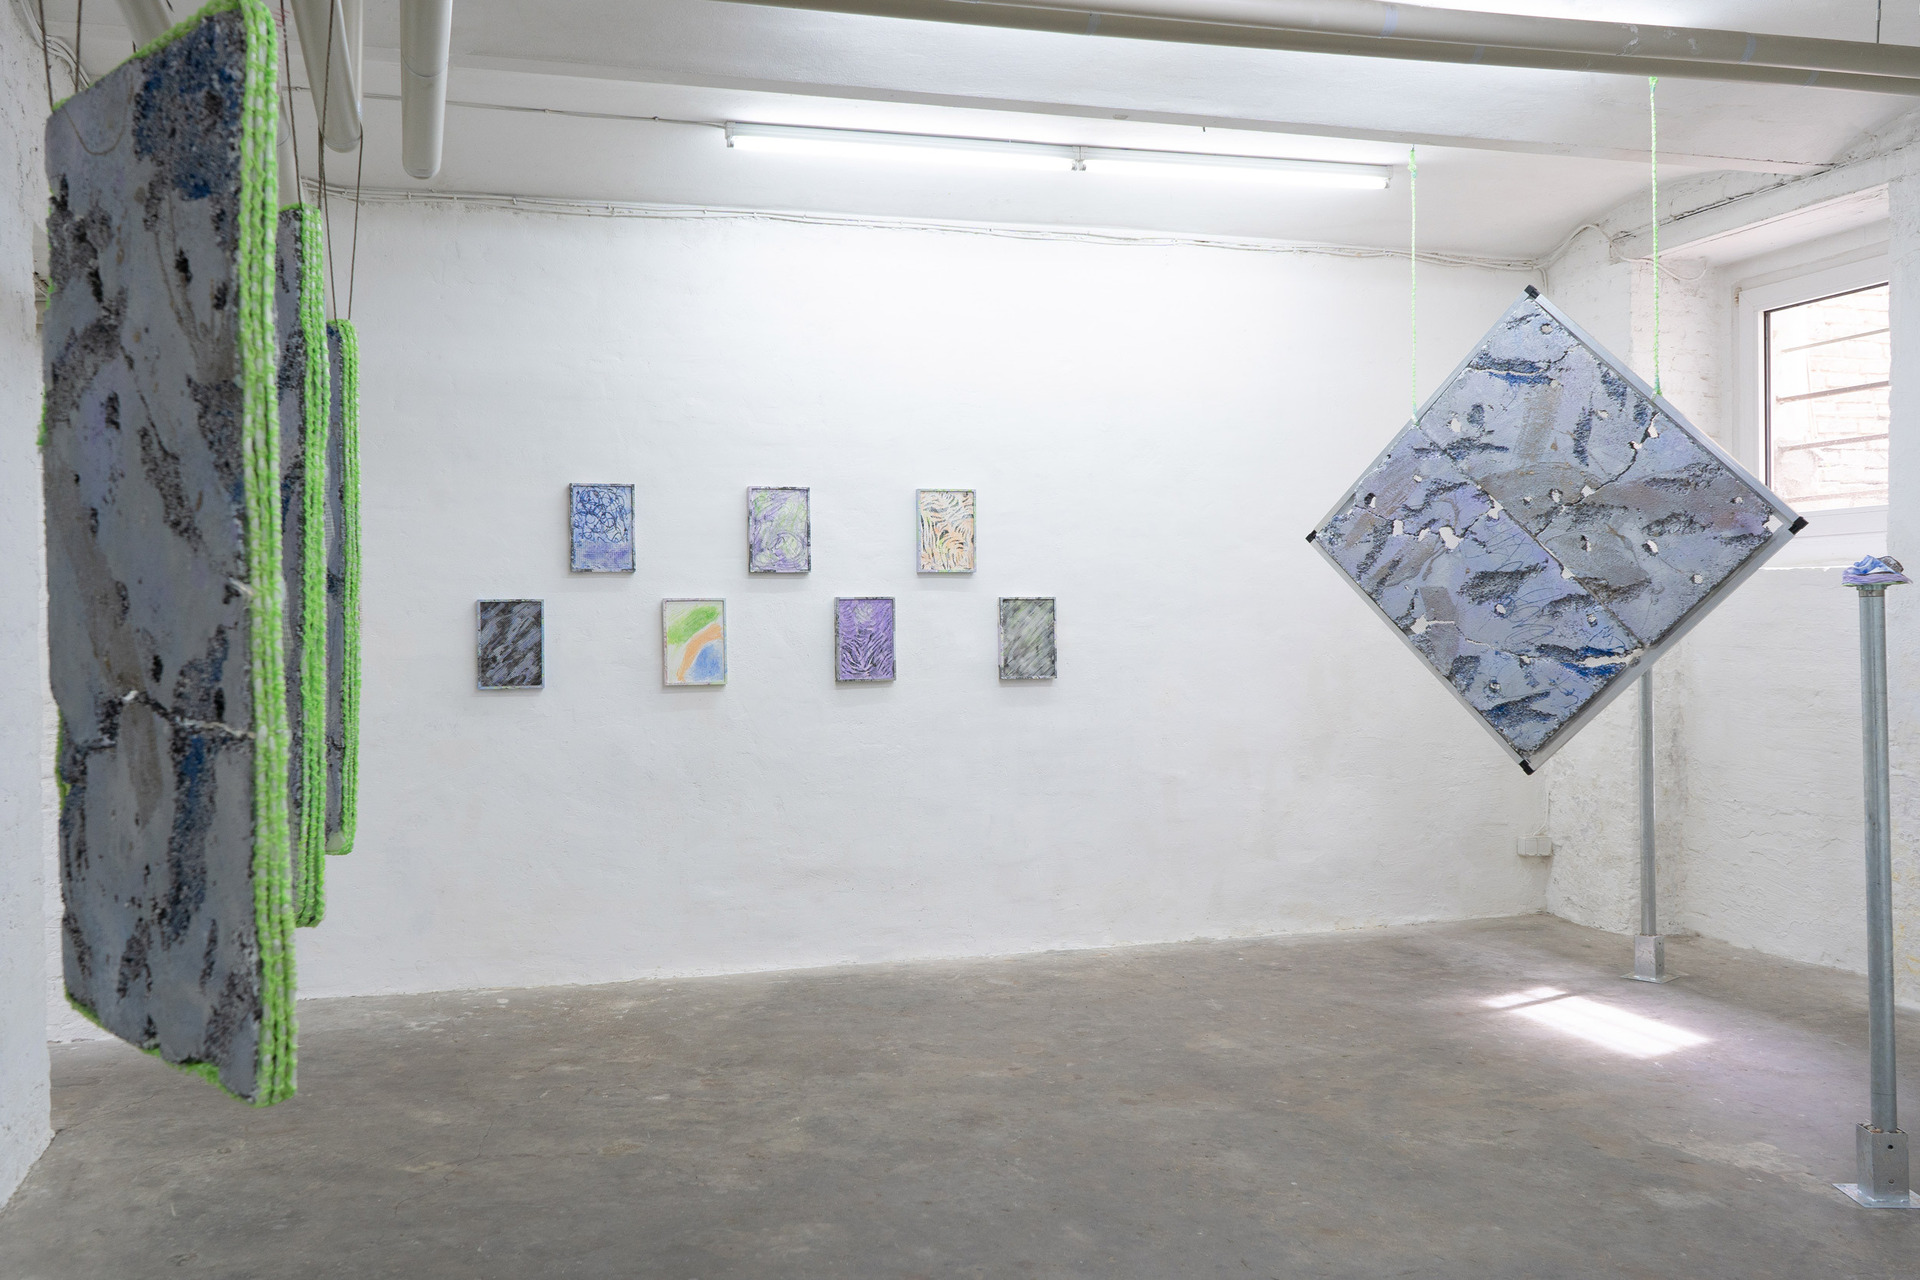 In Material Worlds, installation view